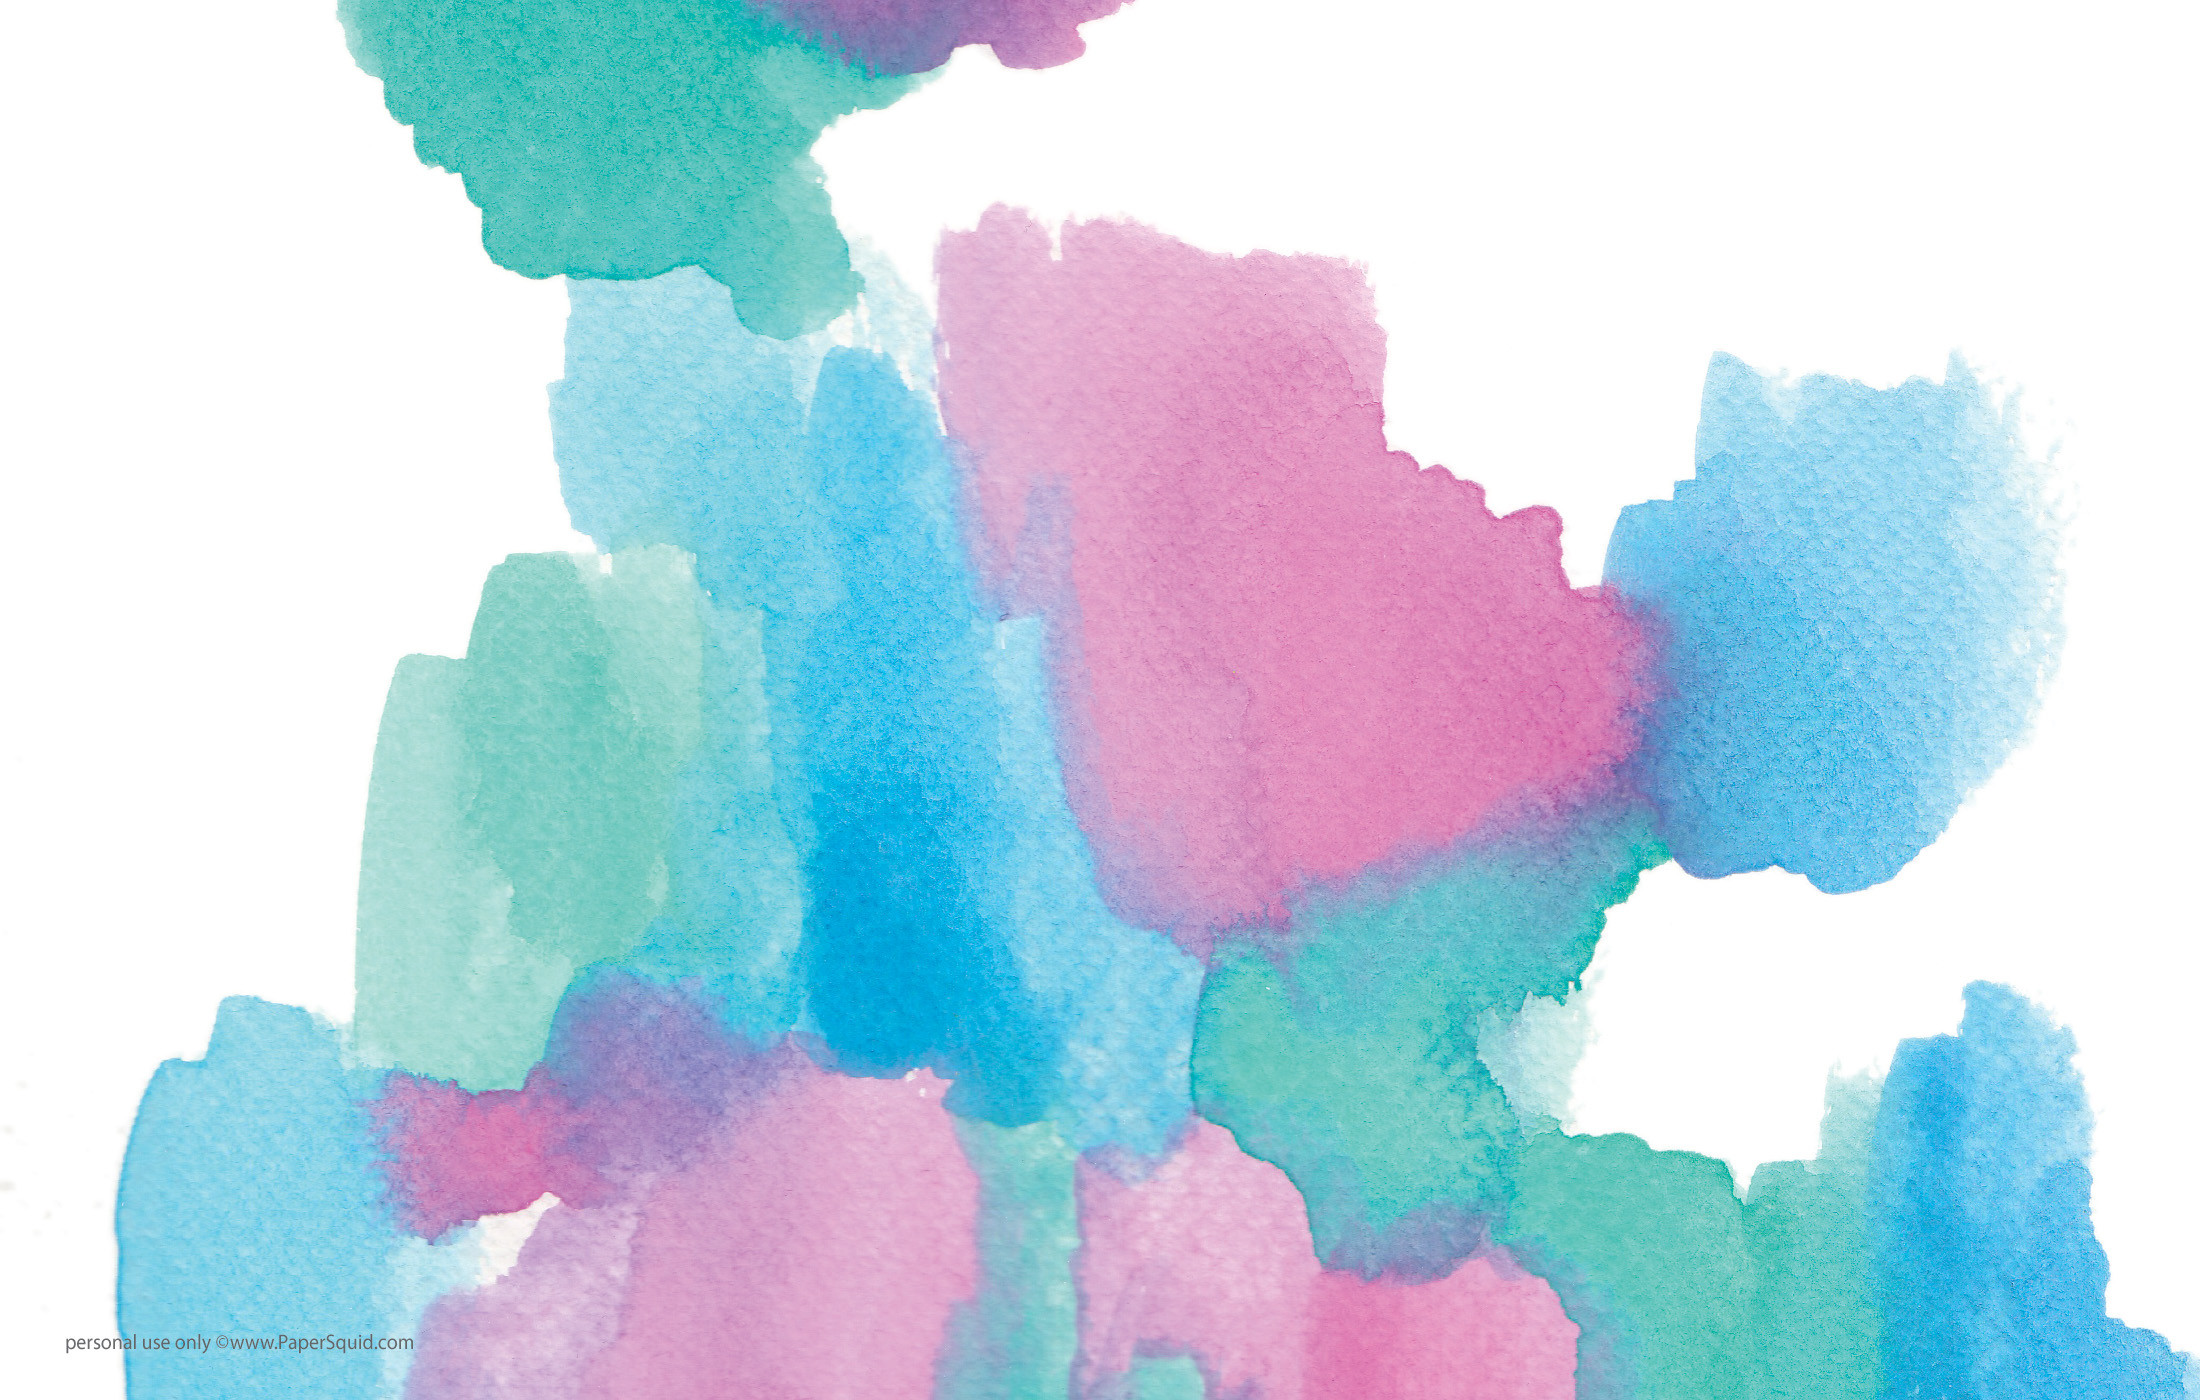 Watercolor design-only version (download here)